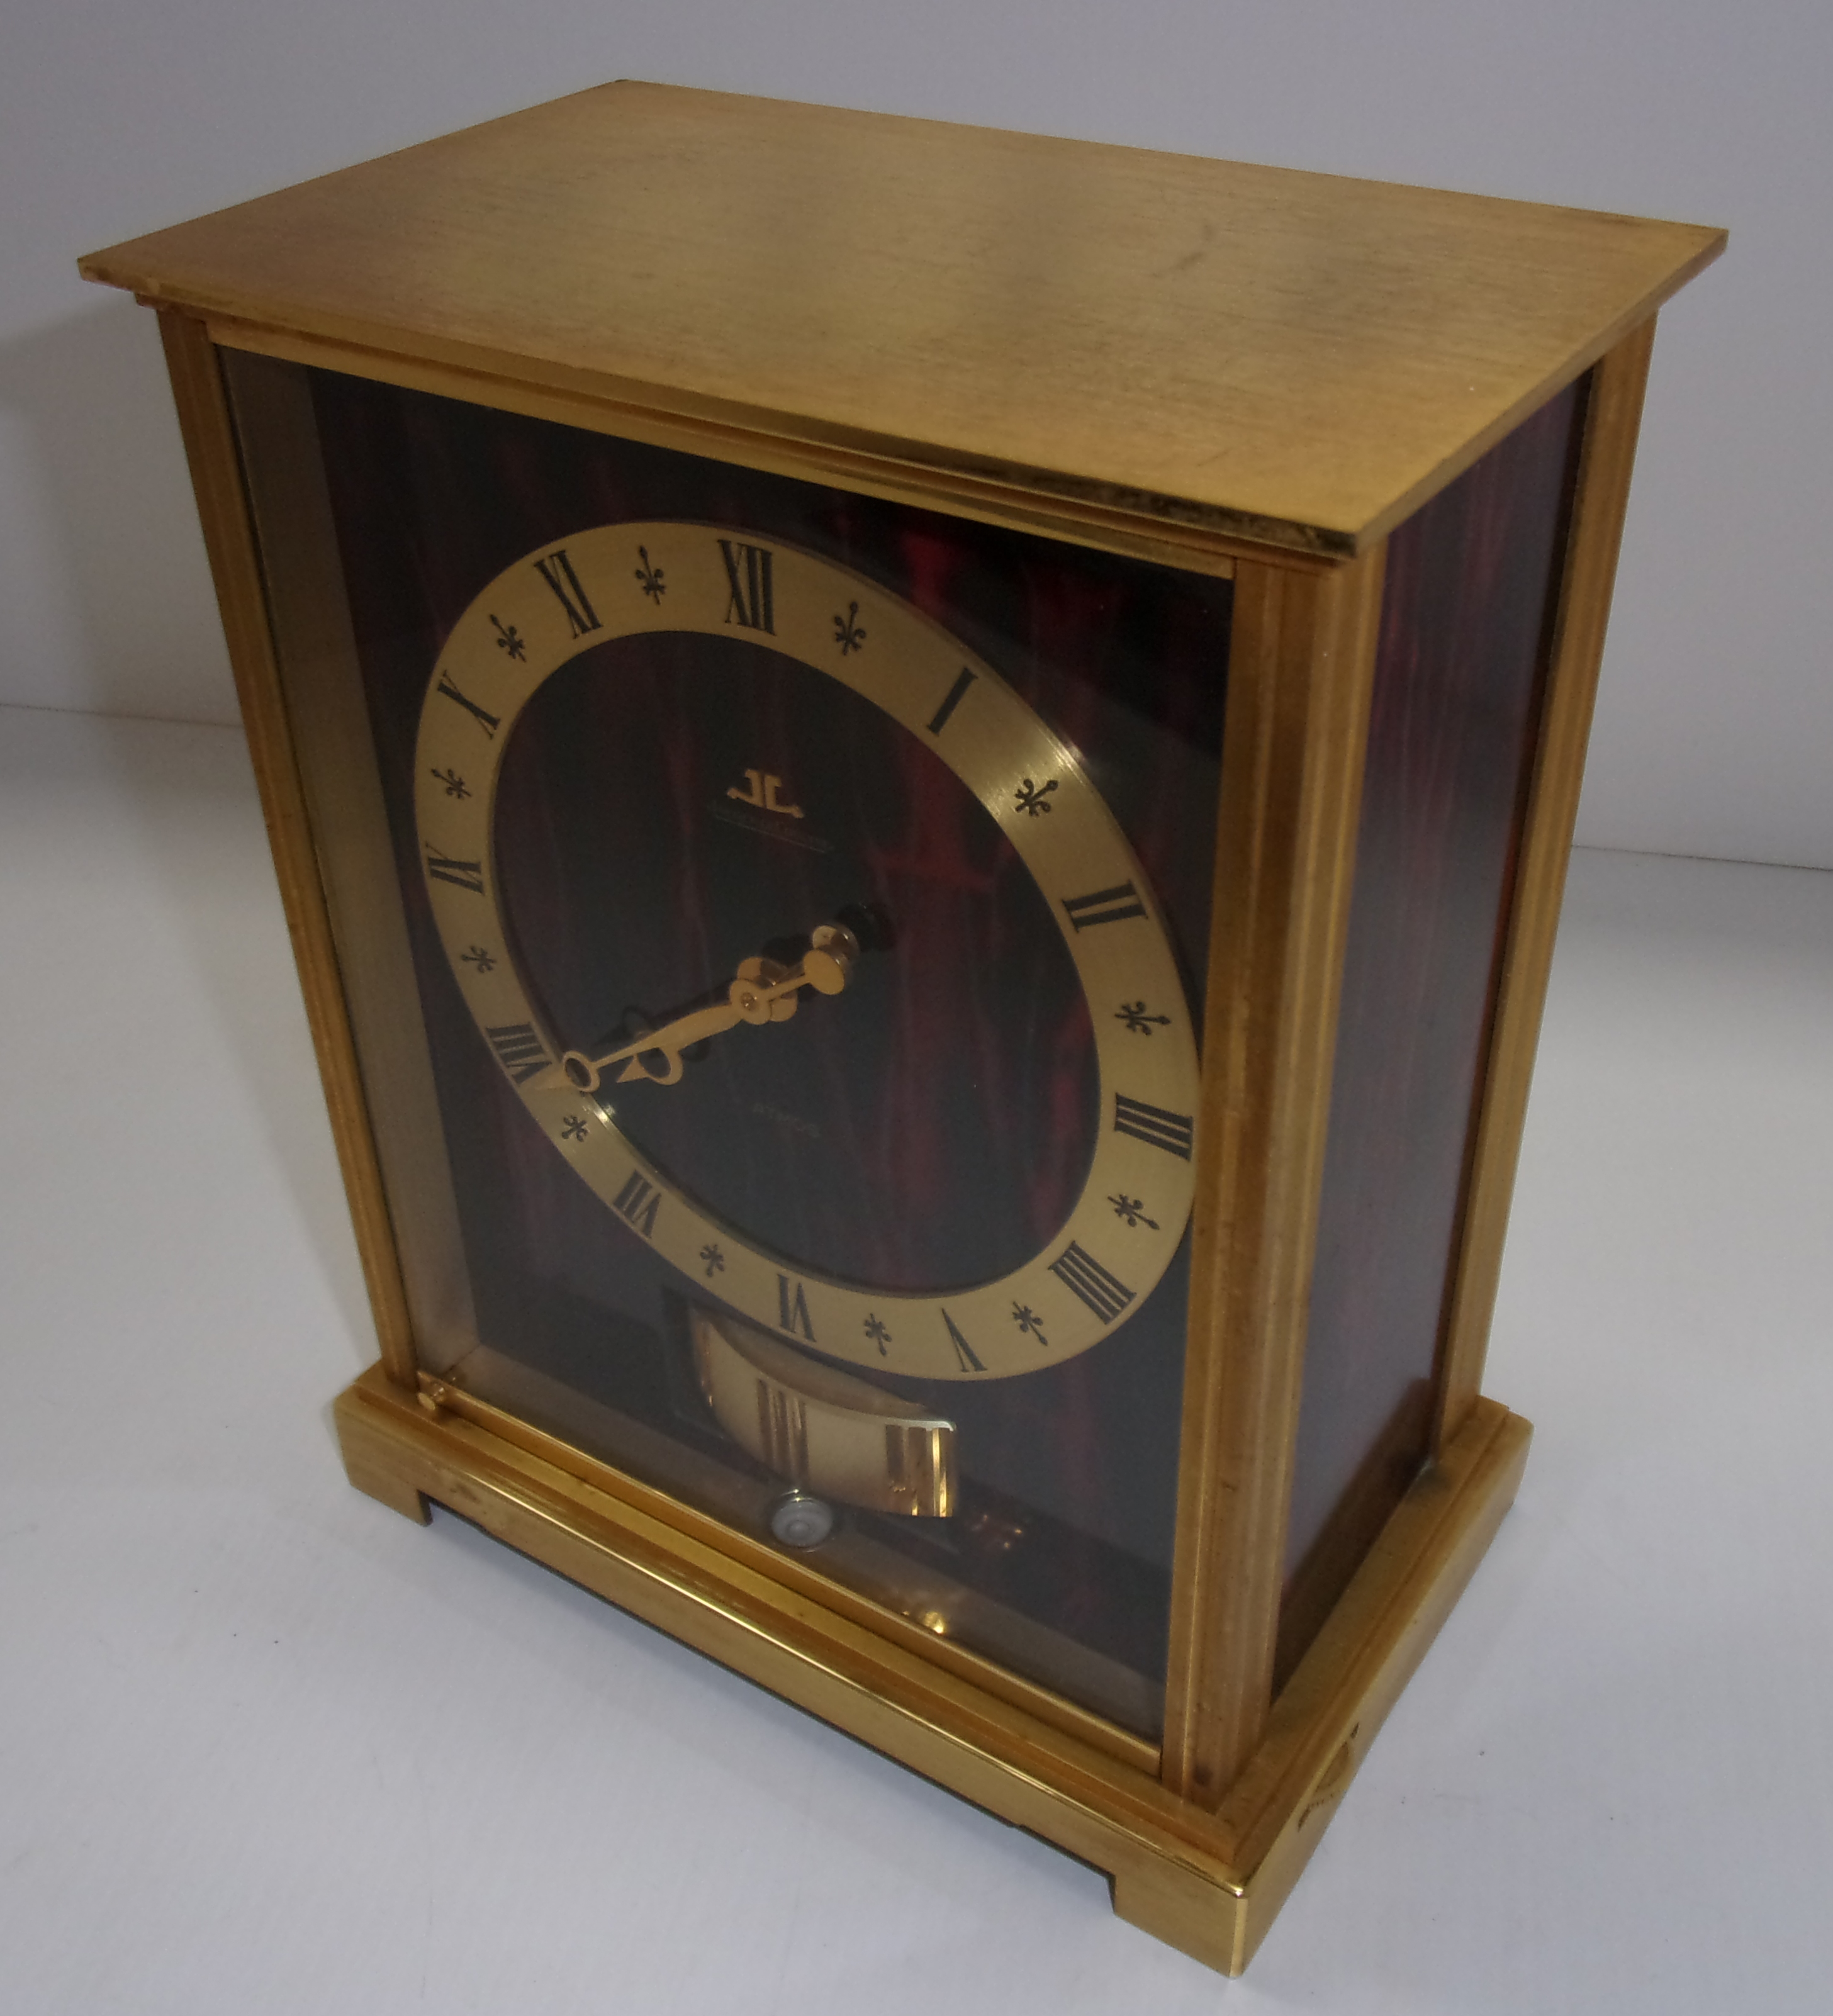 A Jaeger-LeCoultre Atmos Embassy model clock in a brass framed case with simulated tortoiseshell - Image 2 of 2